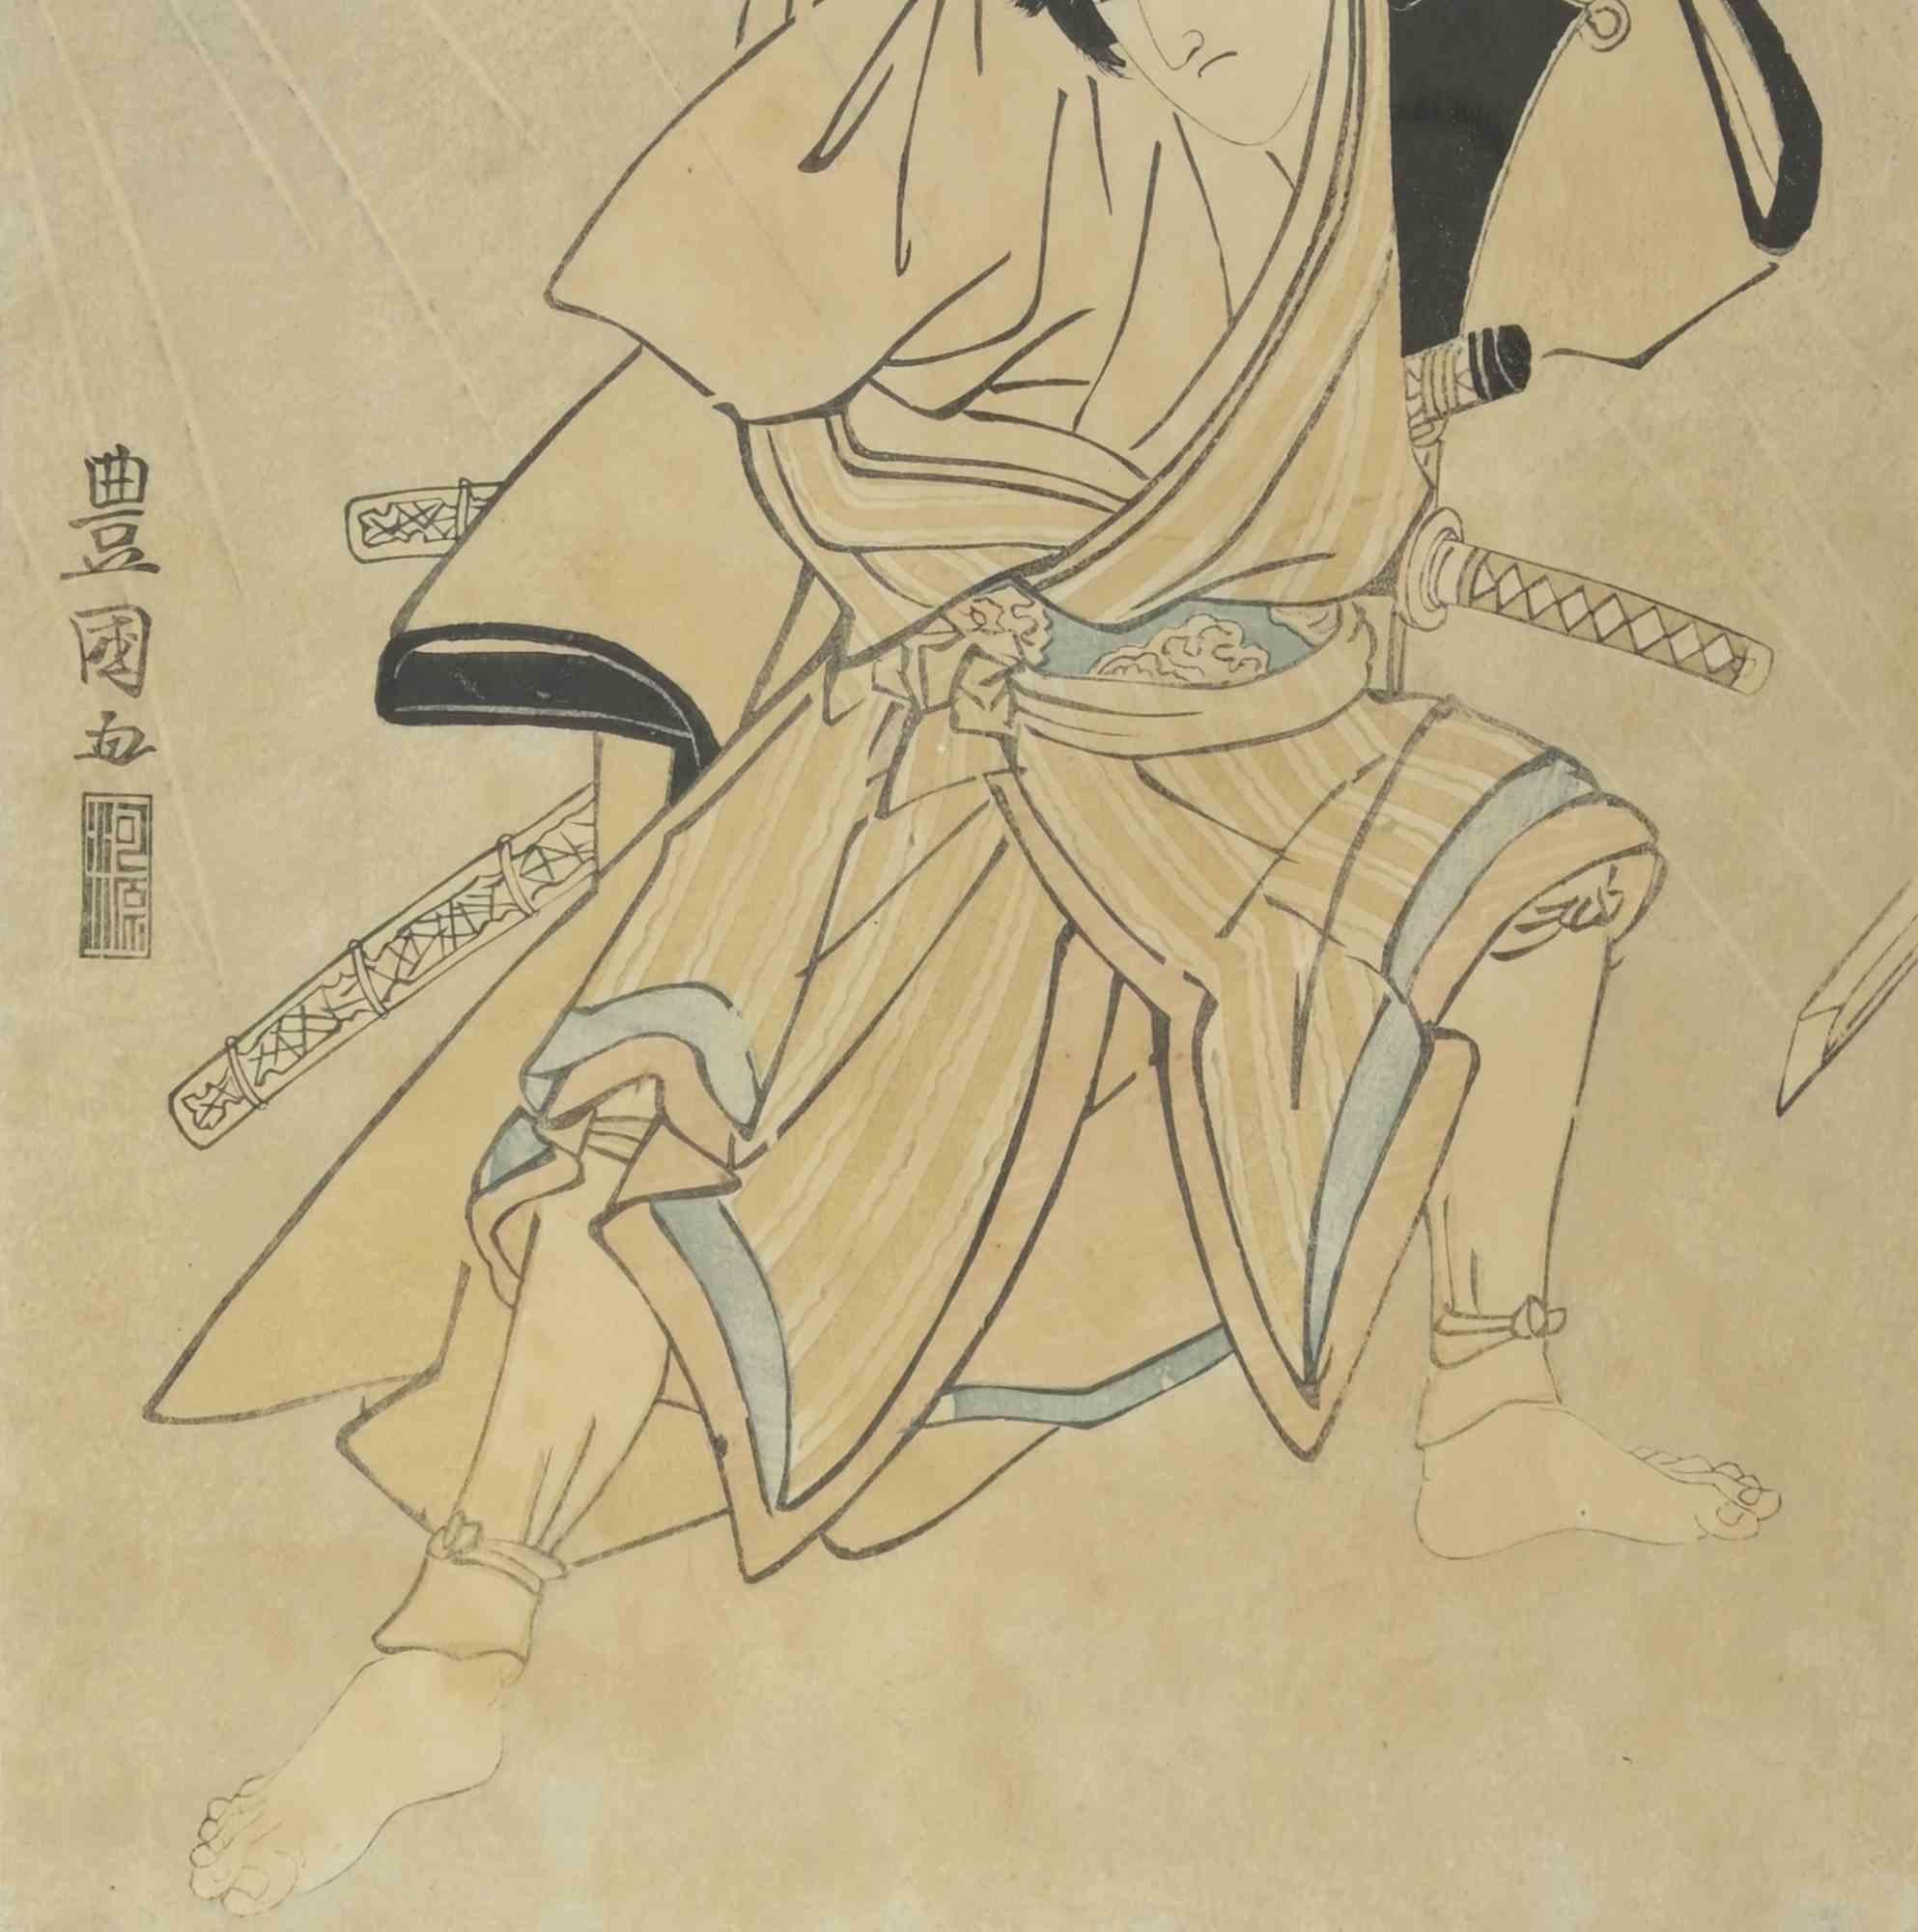 Actor Iwai Hanshiro as a Samurai is an artwork realized by Utagawa Toyokuni (1769-1825), in the early 19th Century

Color woodcut, signed or inscribed in the top right and bottom left in the plat cut-out size 35x 24.5 cm.

Well trimmed, bevel cut